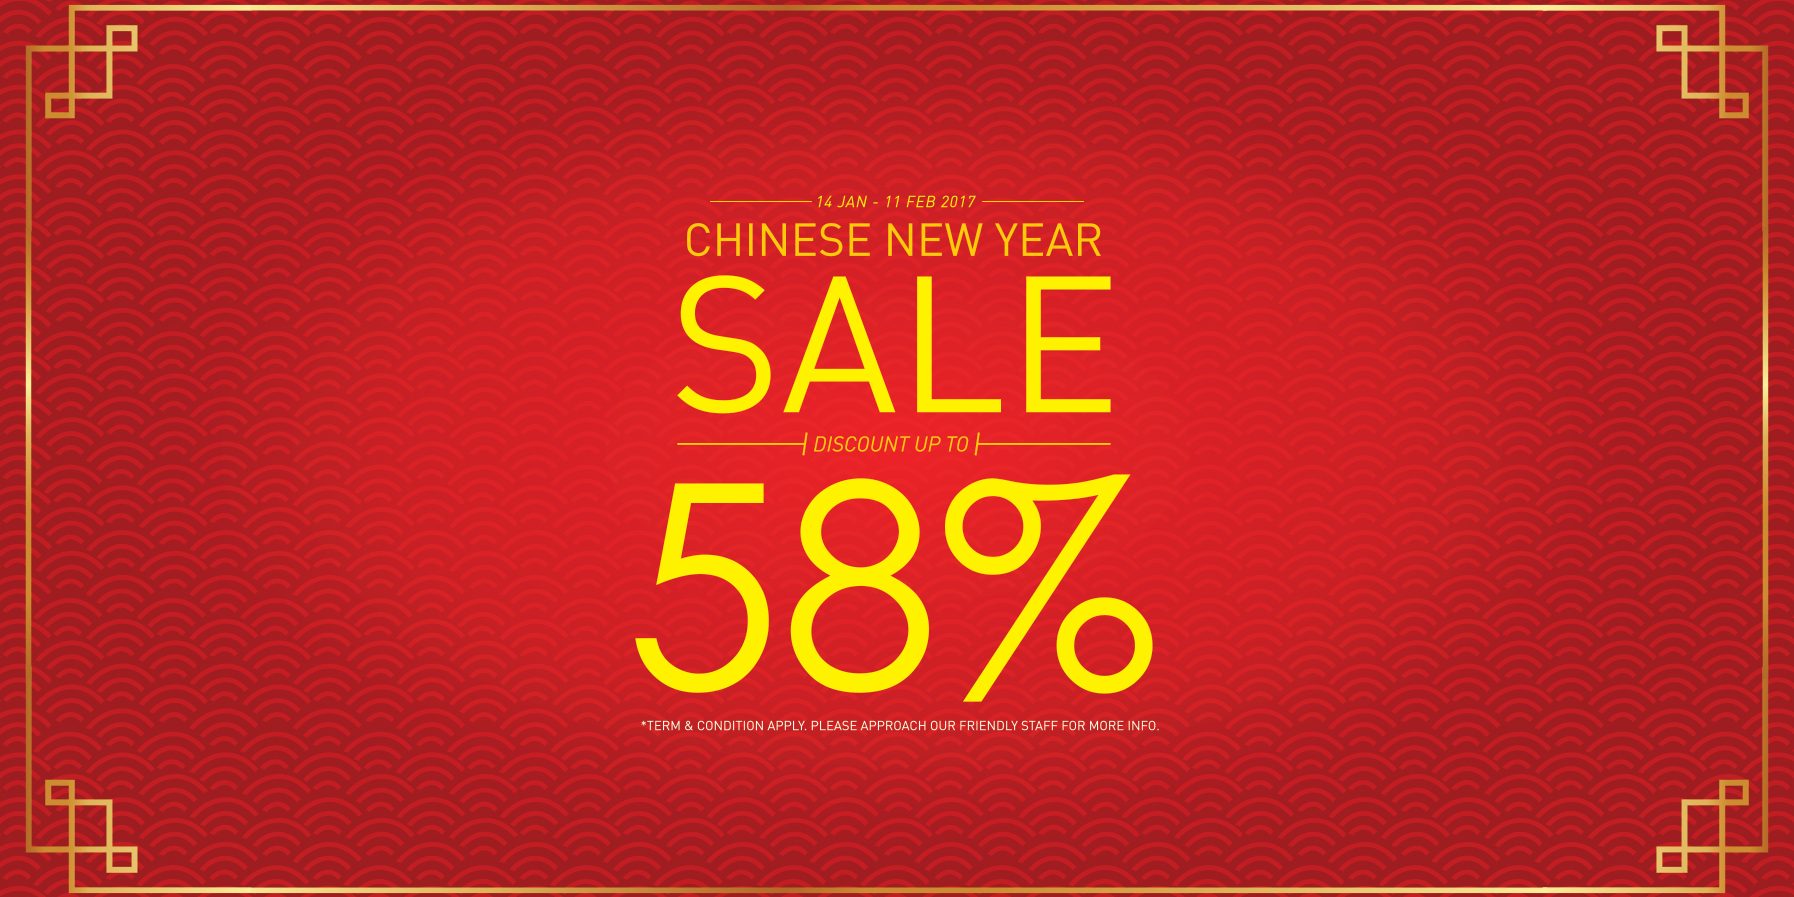 Key Power Sports Singapore Chinese New Year Sale Up to 58% Off Promotion 14 Jan – 11 Feb 2017